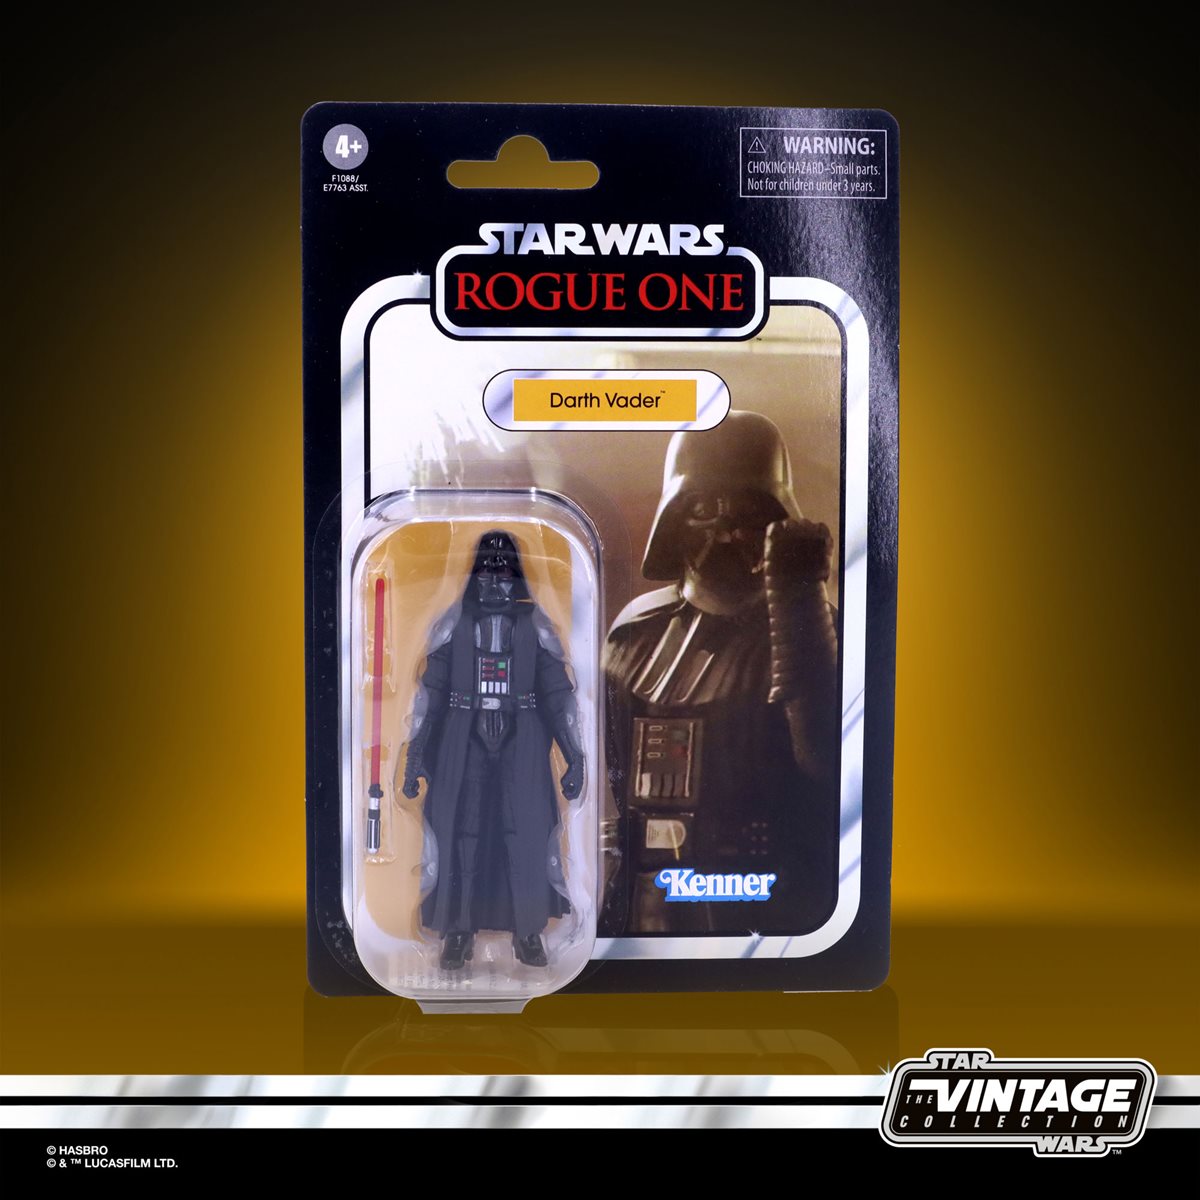 Star Wars Rogue One Deluxe Figure Playset 10 Heroes DarthVader Cake Topper Bc3z1 for sale online